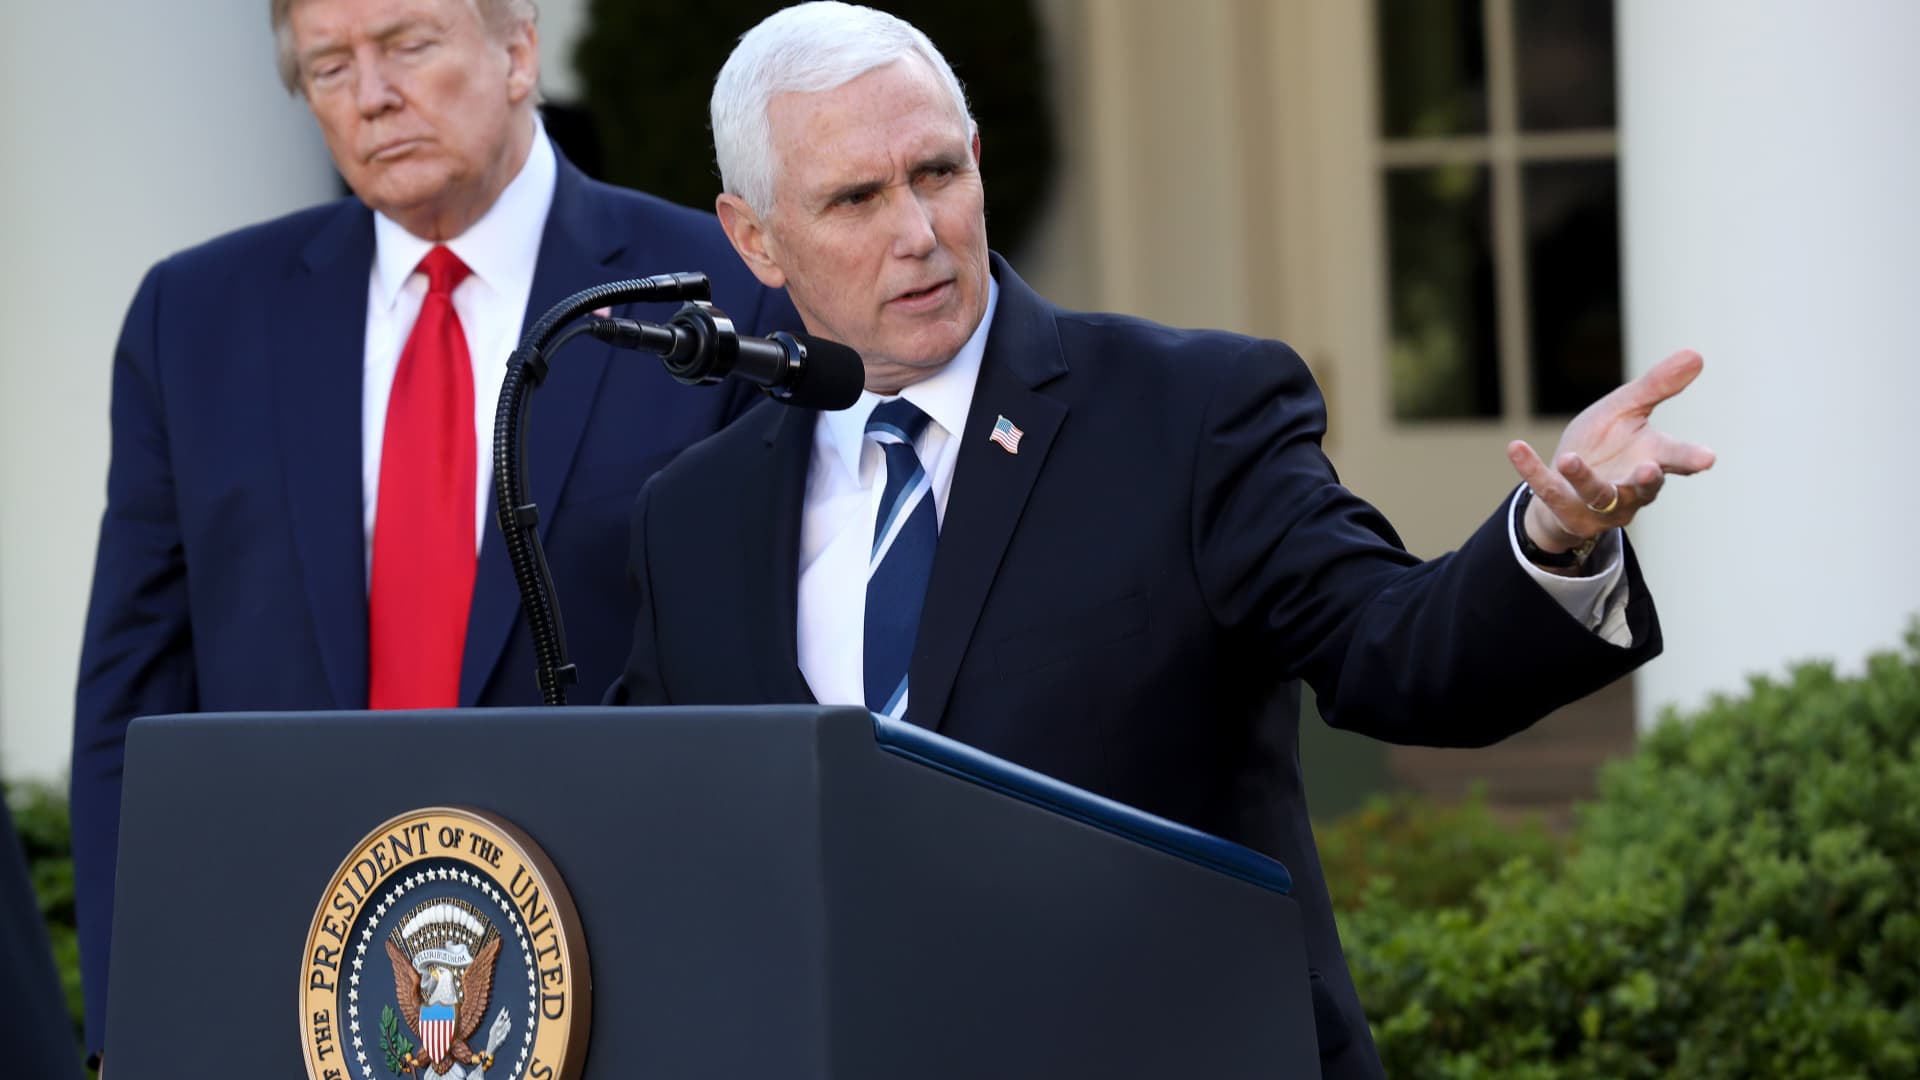 Appeals court rejects Trump’s effort to block Pence from testifying in Jan. 6 probe